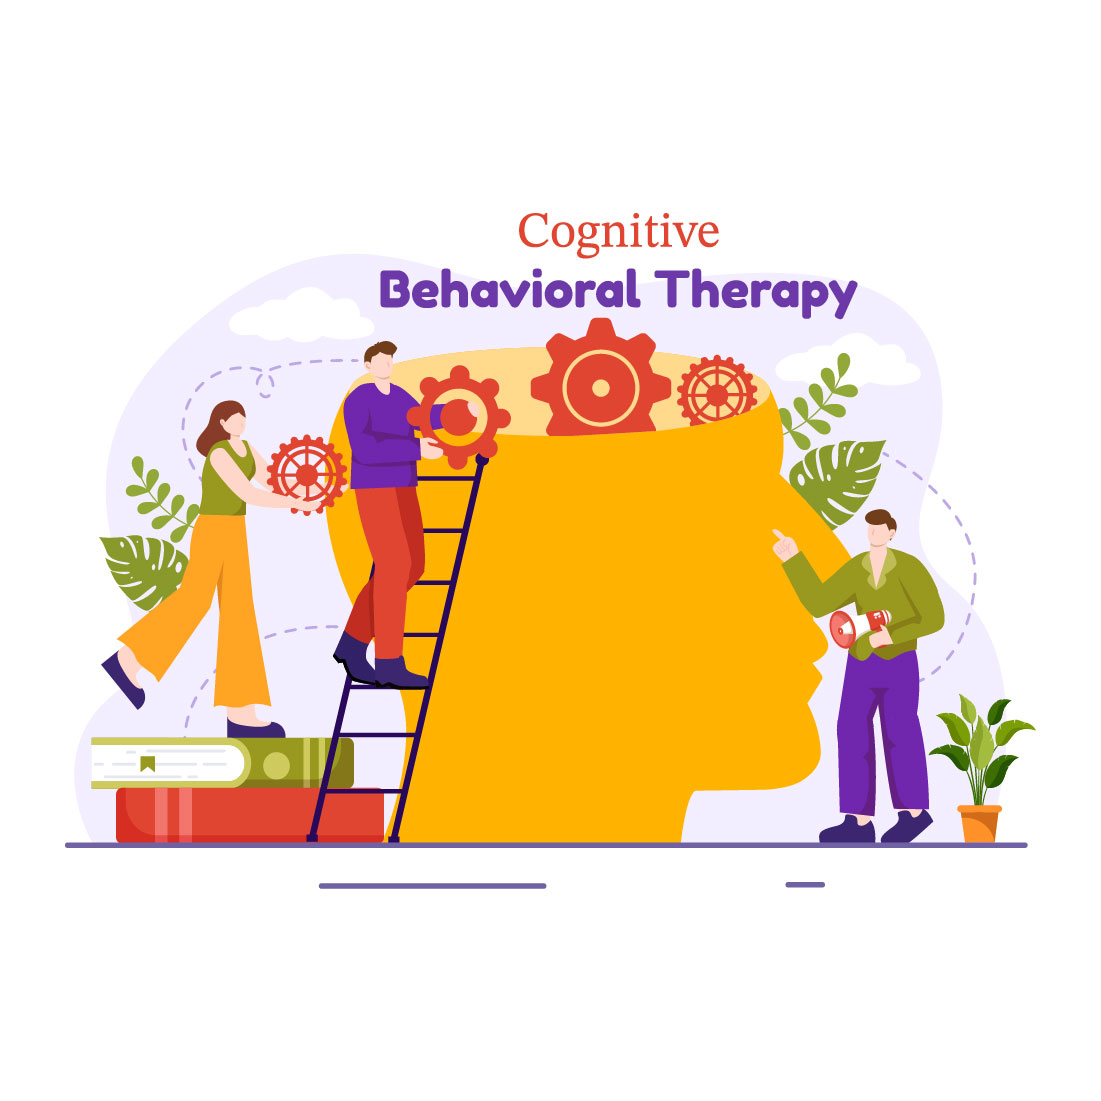 12 Cognitive Behavioural Therapy Illustration cover image.